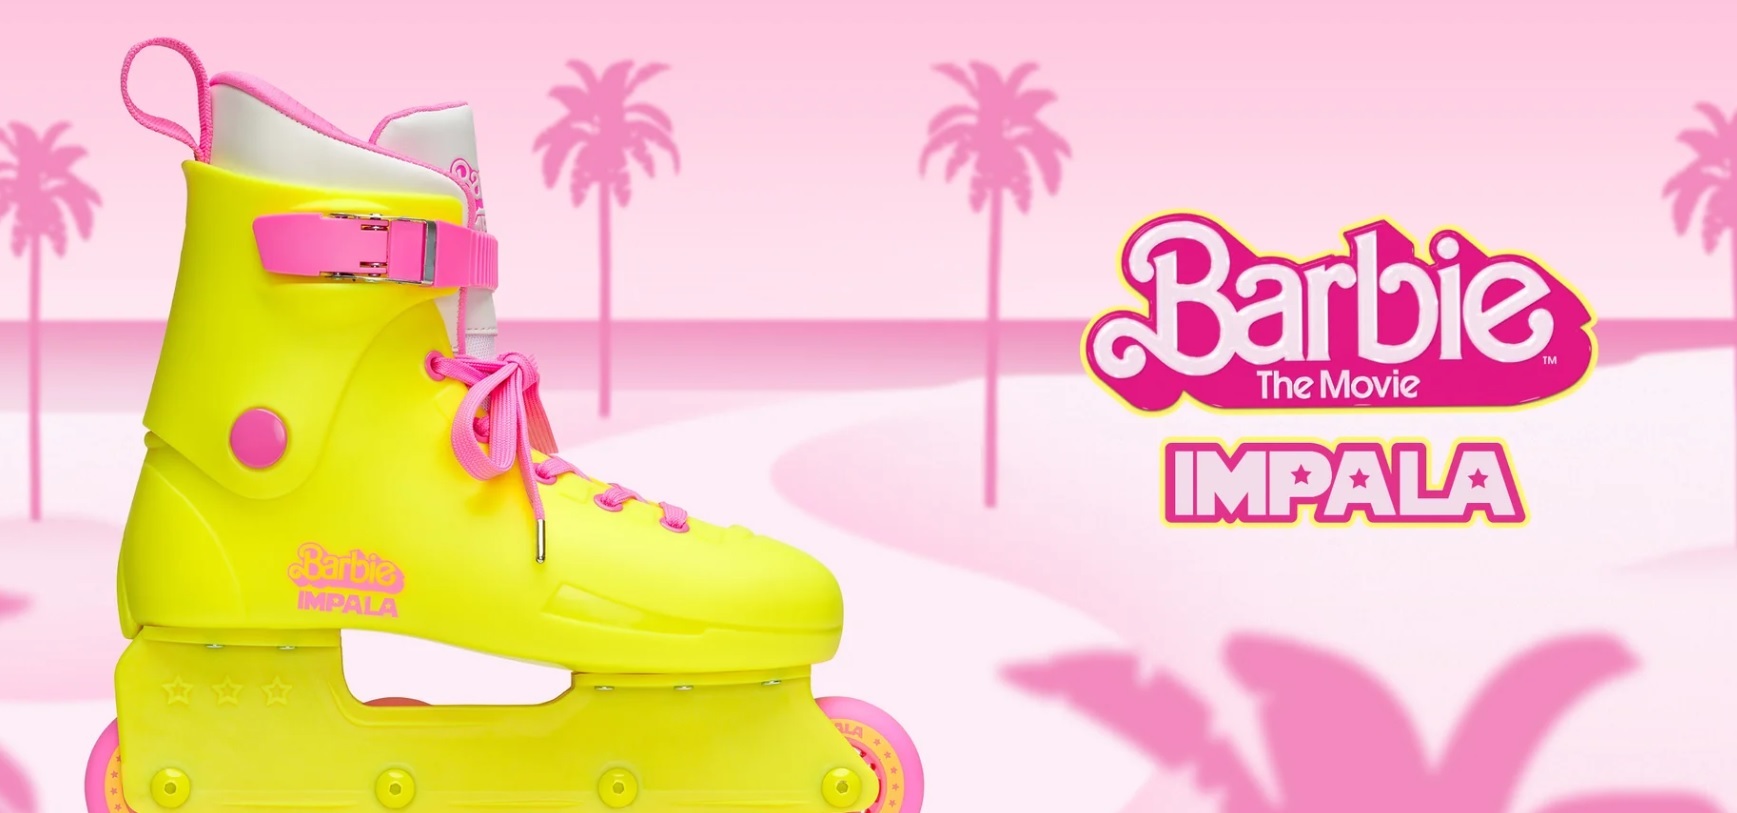 You can your Ken-ergy with Impala's Barbie roller skates